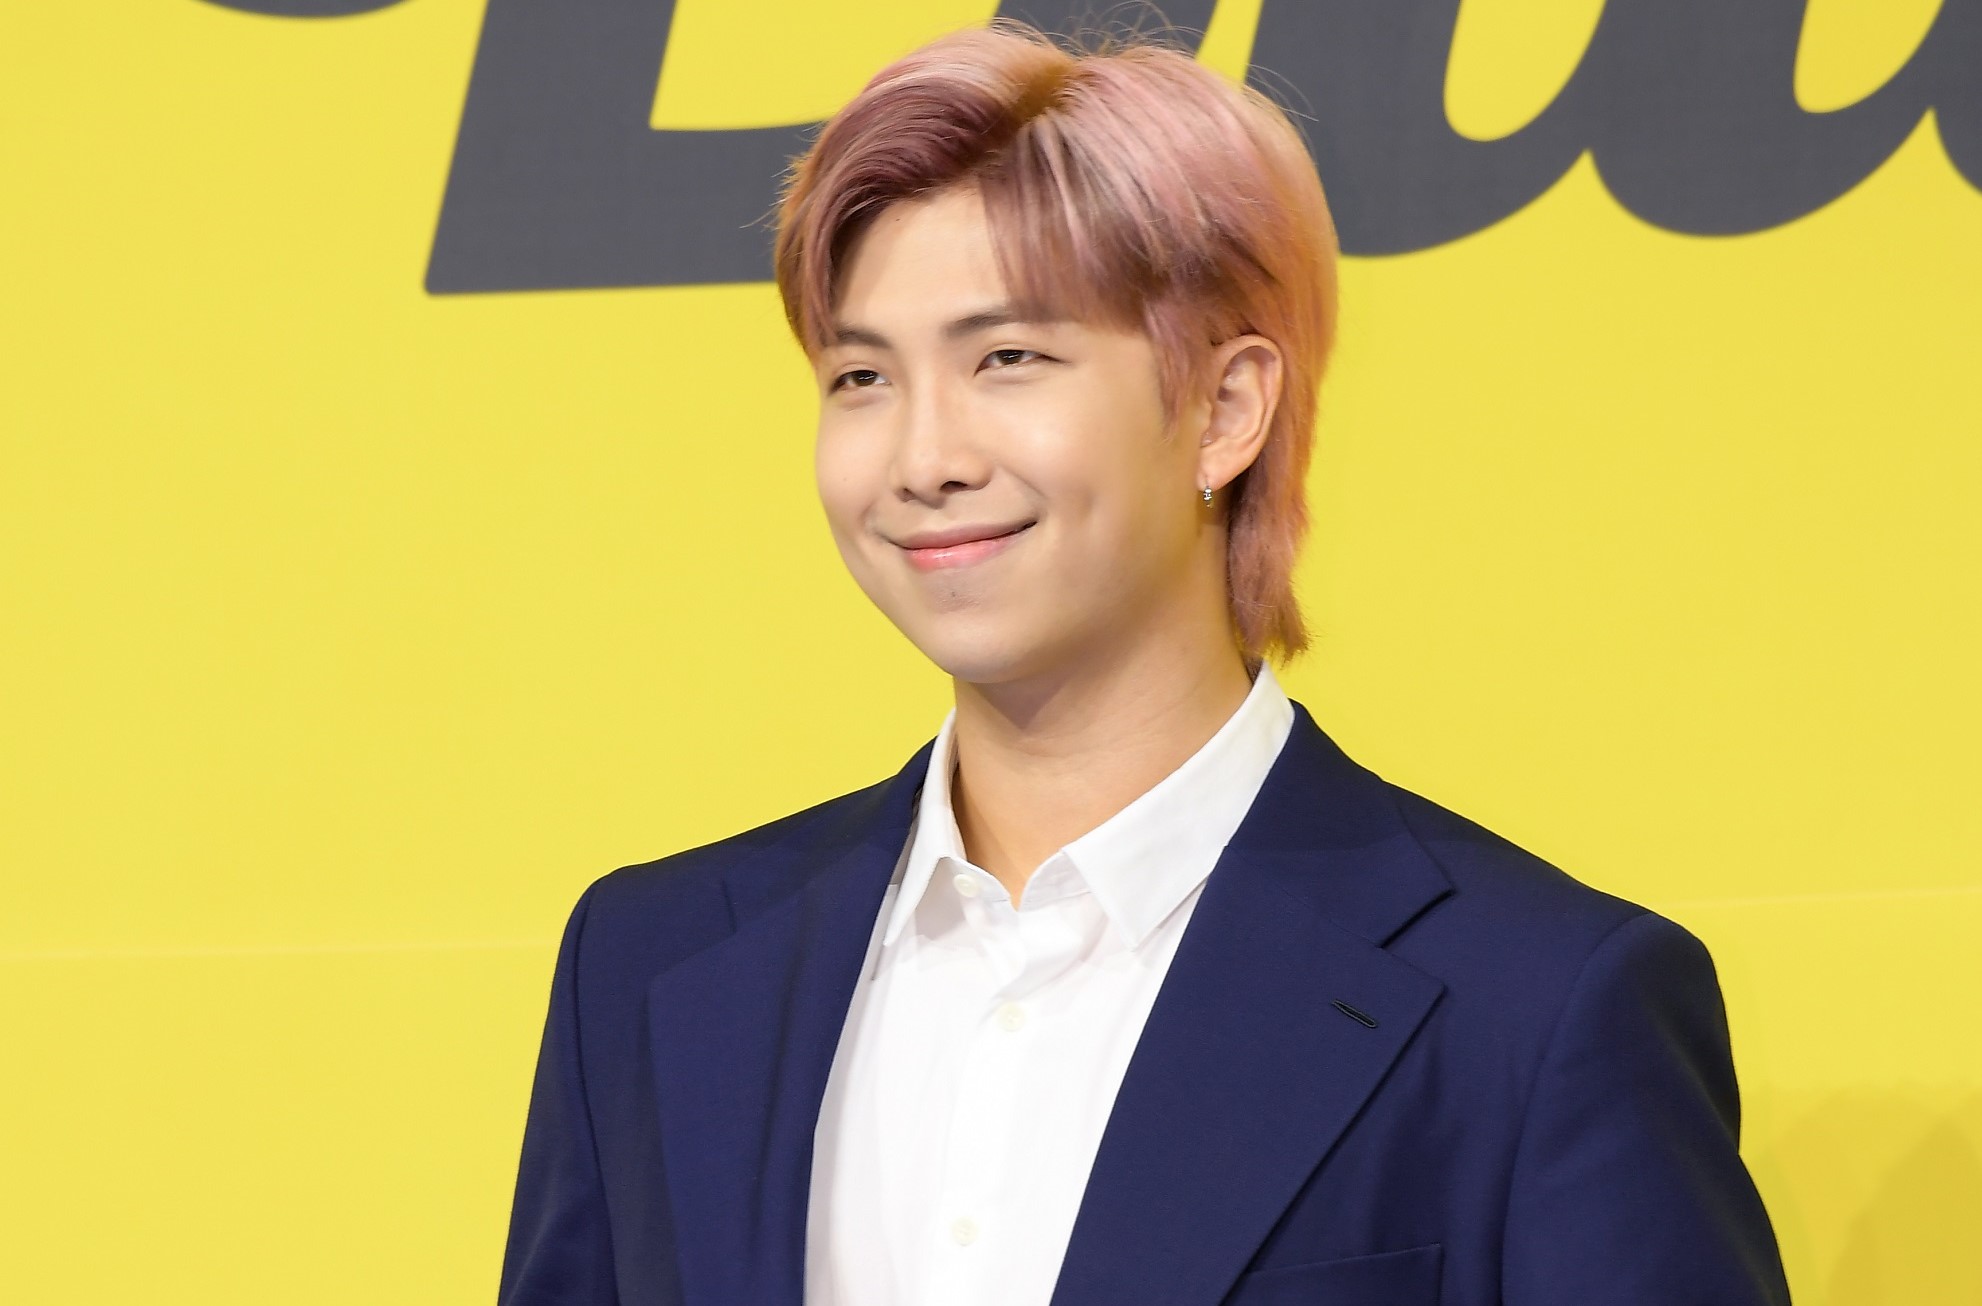 RM of BTS attends BTS' press conference for their single 'Butter'